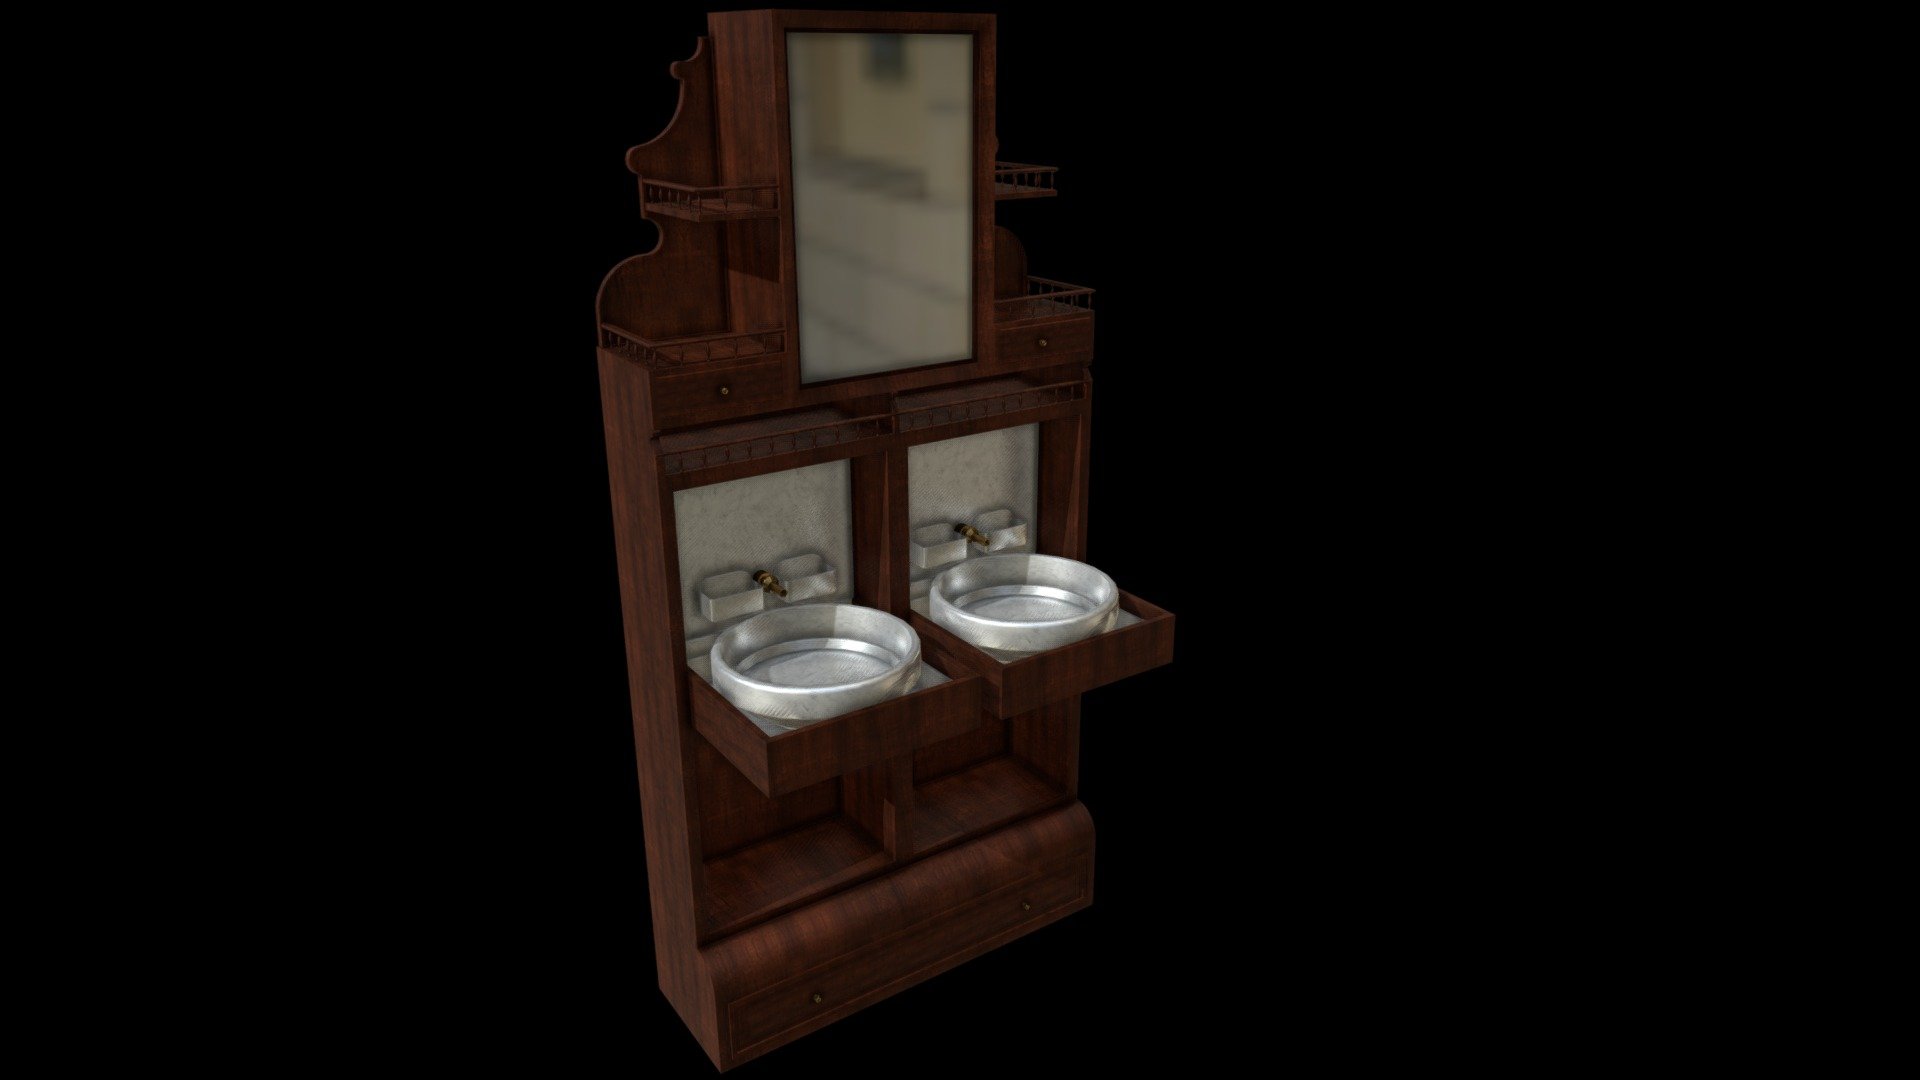 Third class wash basin - Second class wash basin - Buy Royalty Free 3D model by MichaelWoods 3d model